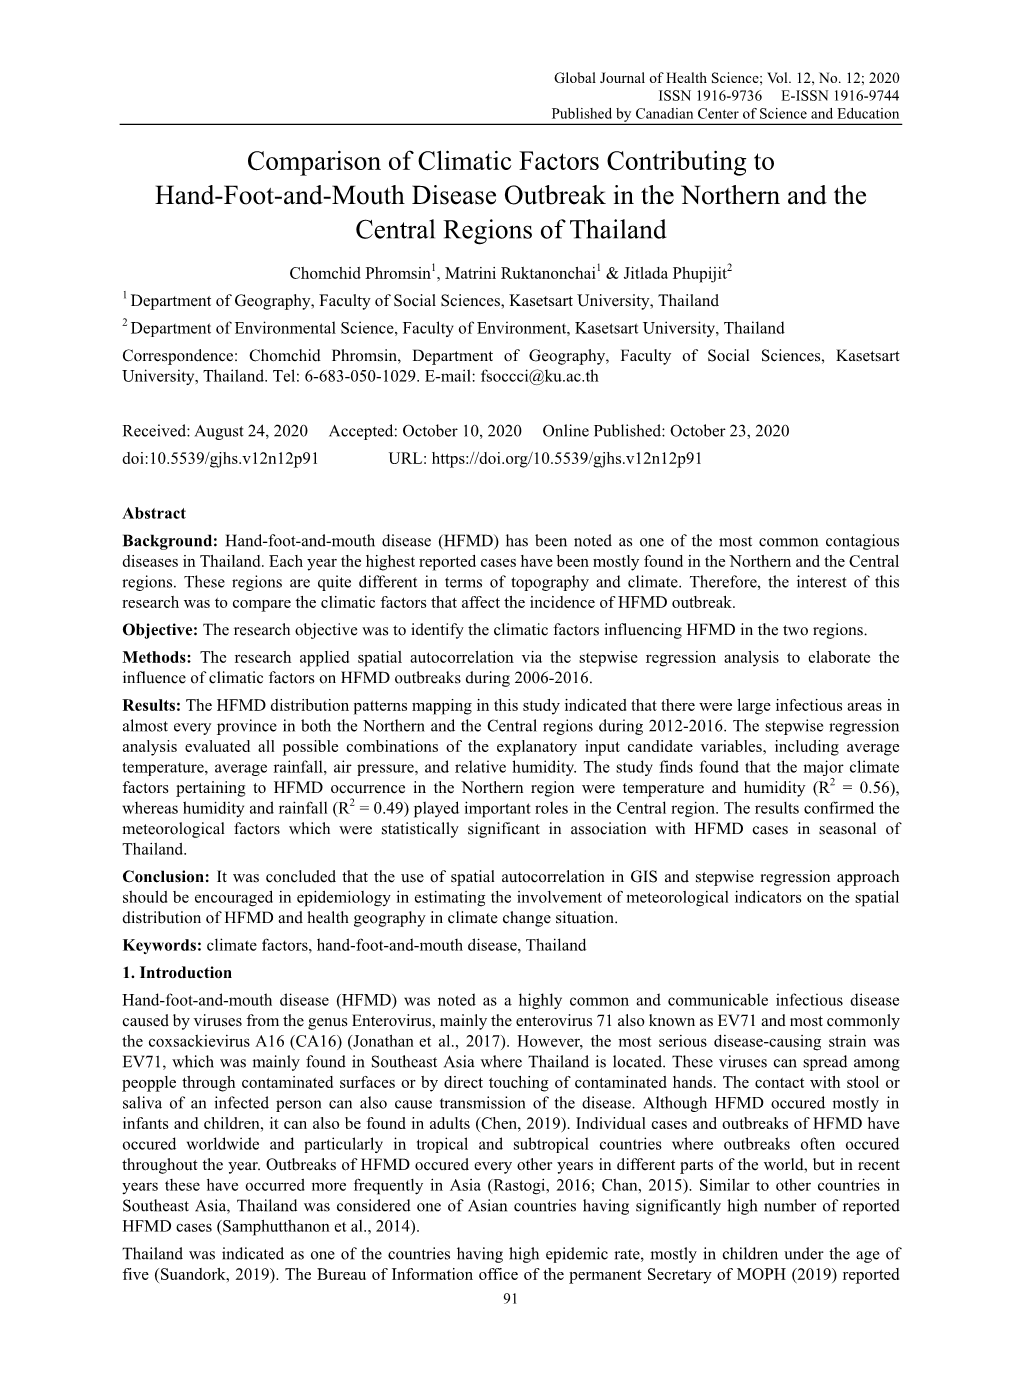 Comparison of Climatic Factors Contributing to Hand-Foot-And-Mouth Disease Outbreak in the Northern and the Central Regions of Thailand